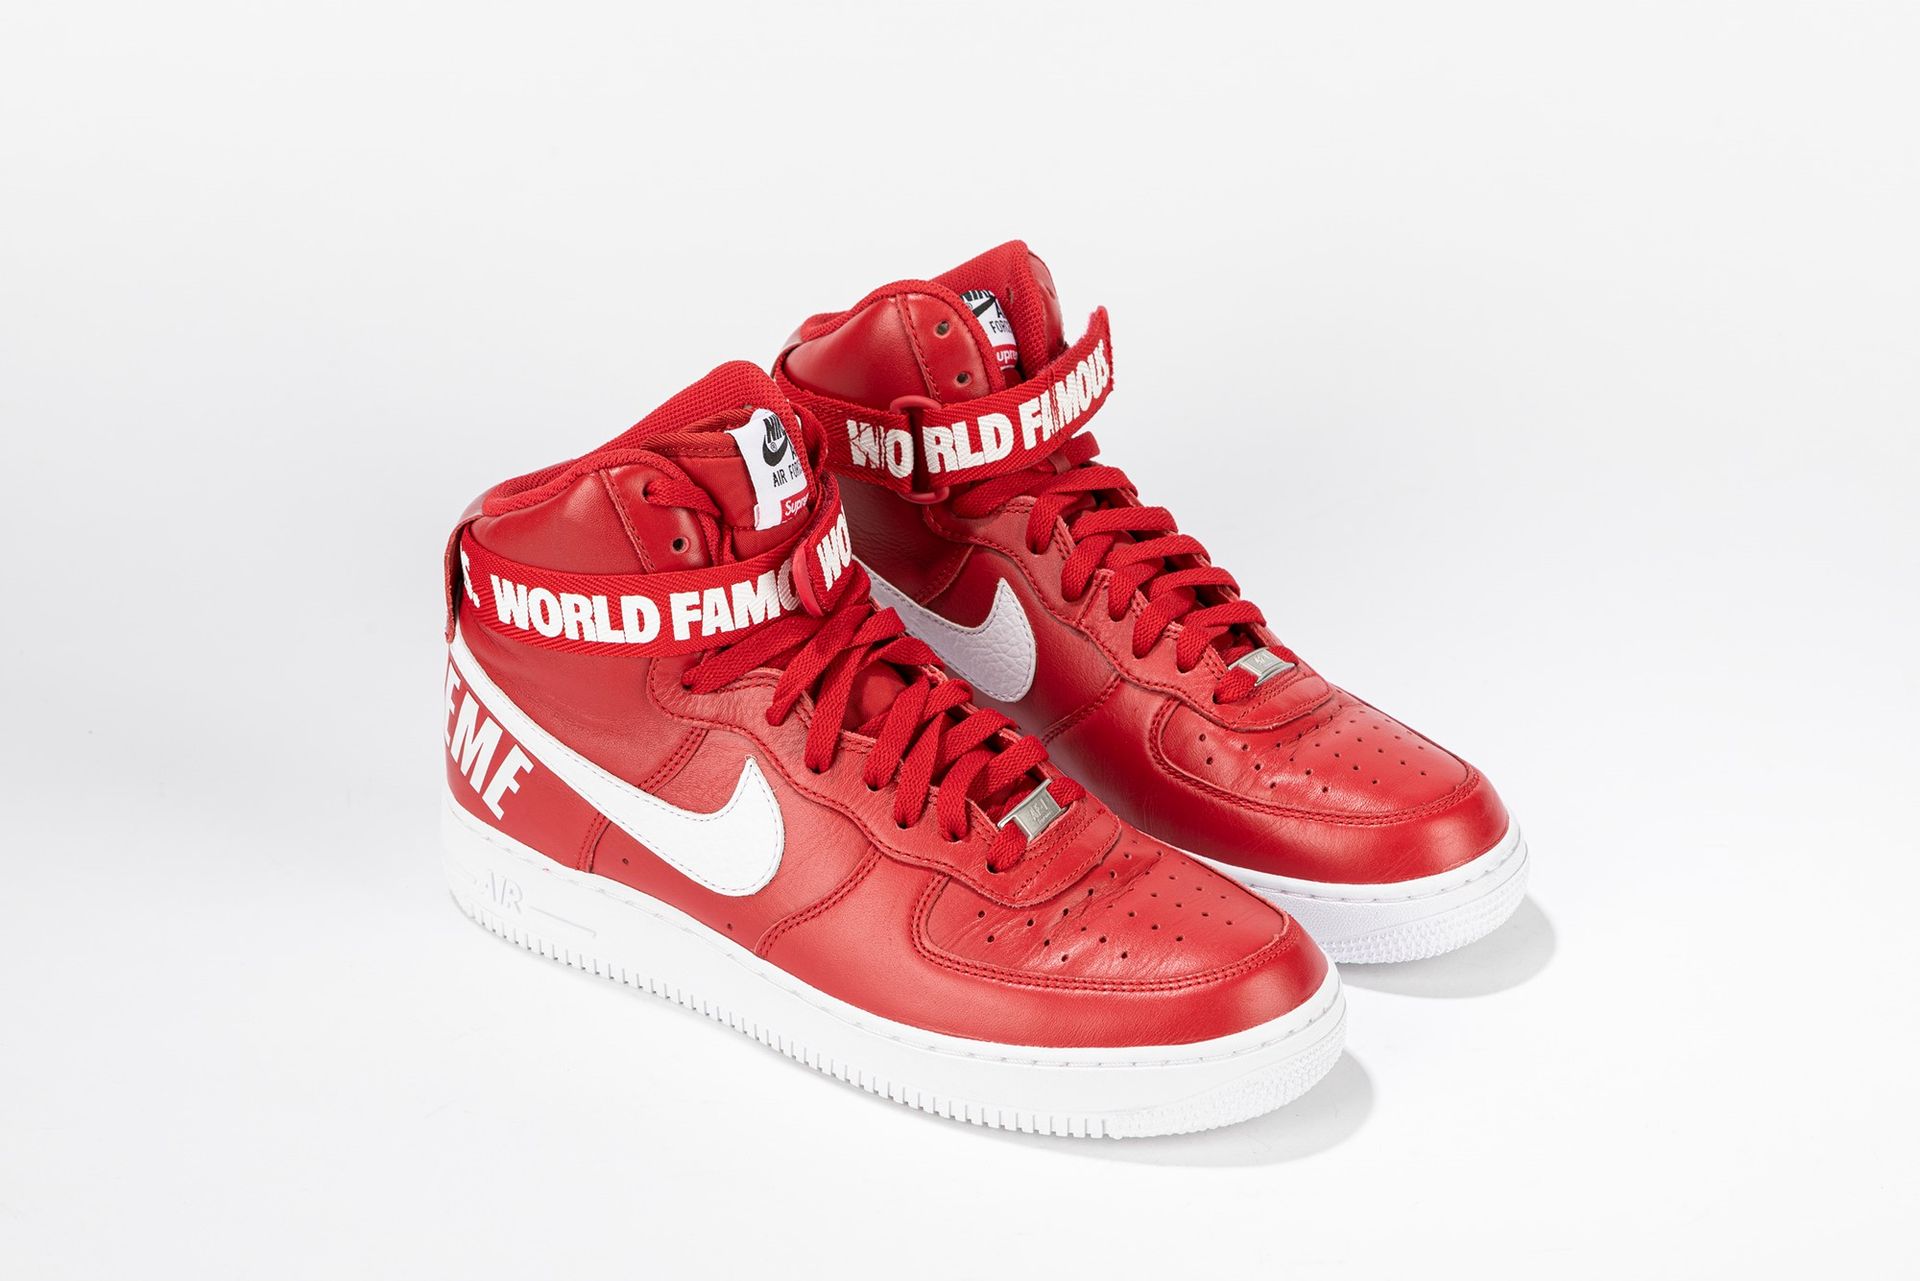 NIKE Air Force 1 High Supreme World Famous Red| Talla US 9.5 EUR 43, 2014


Nike&hellip;